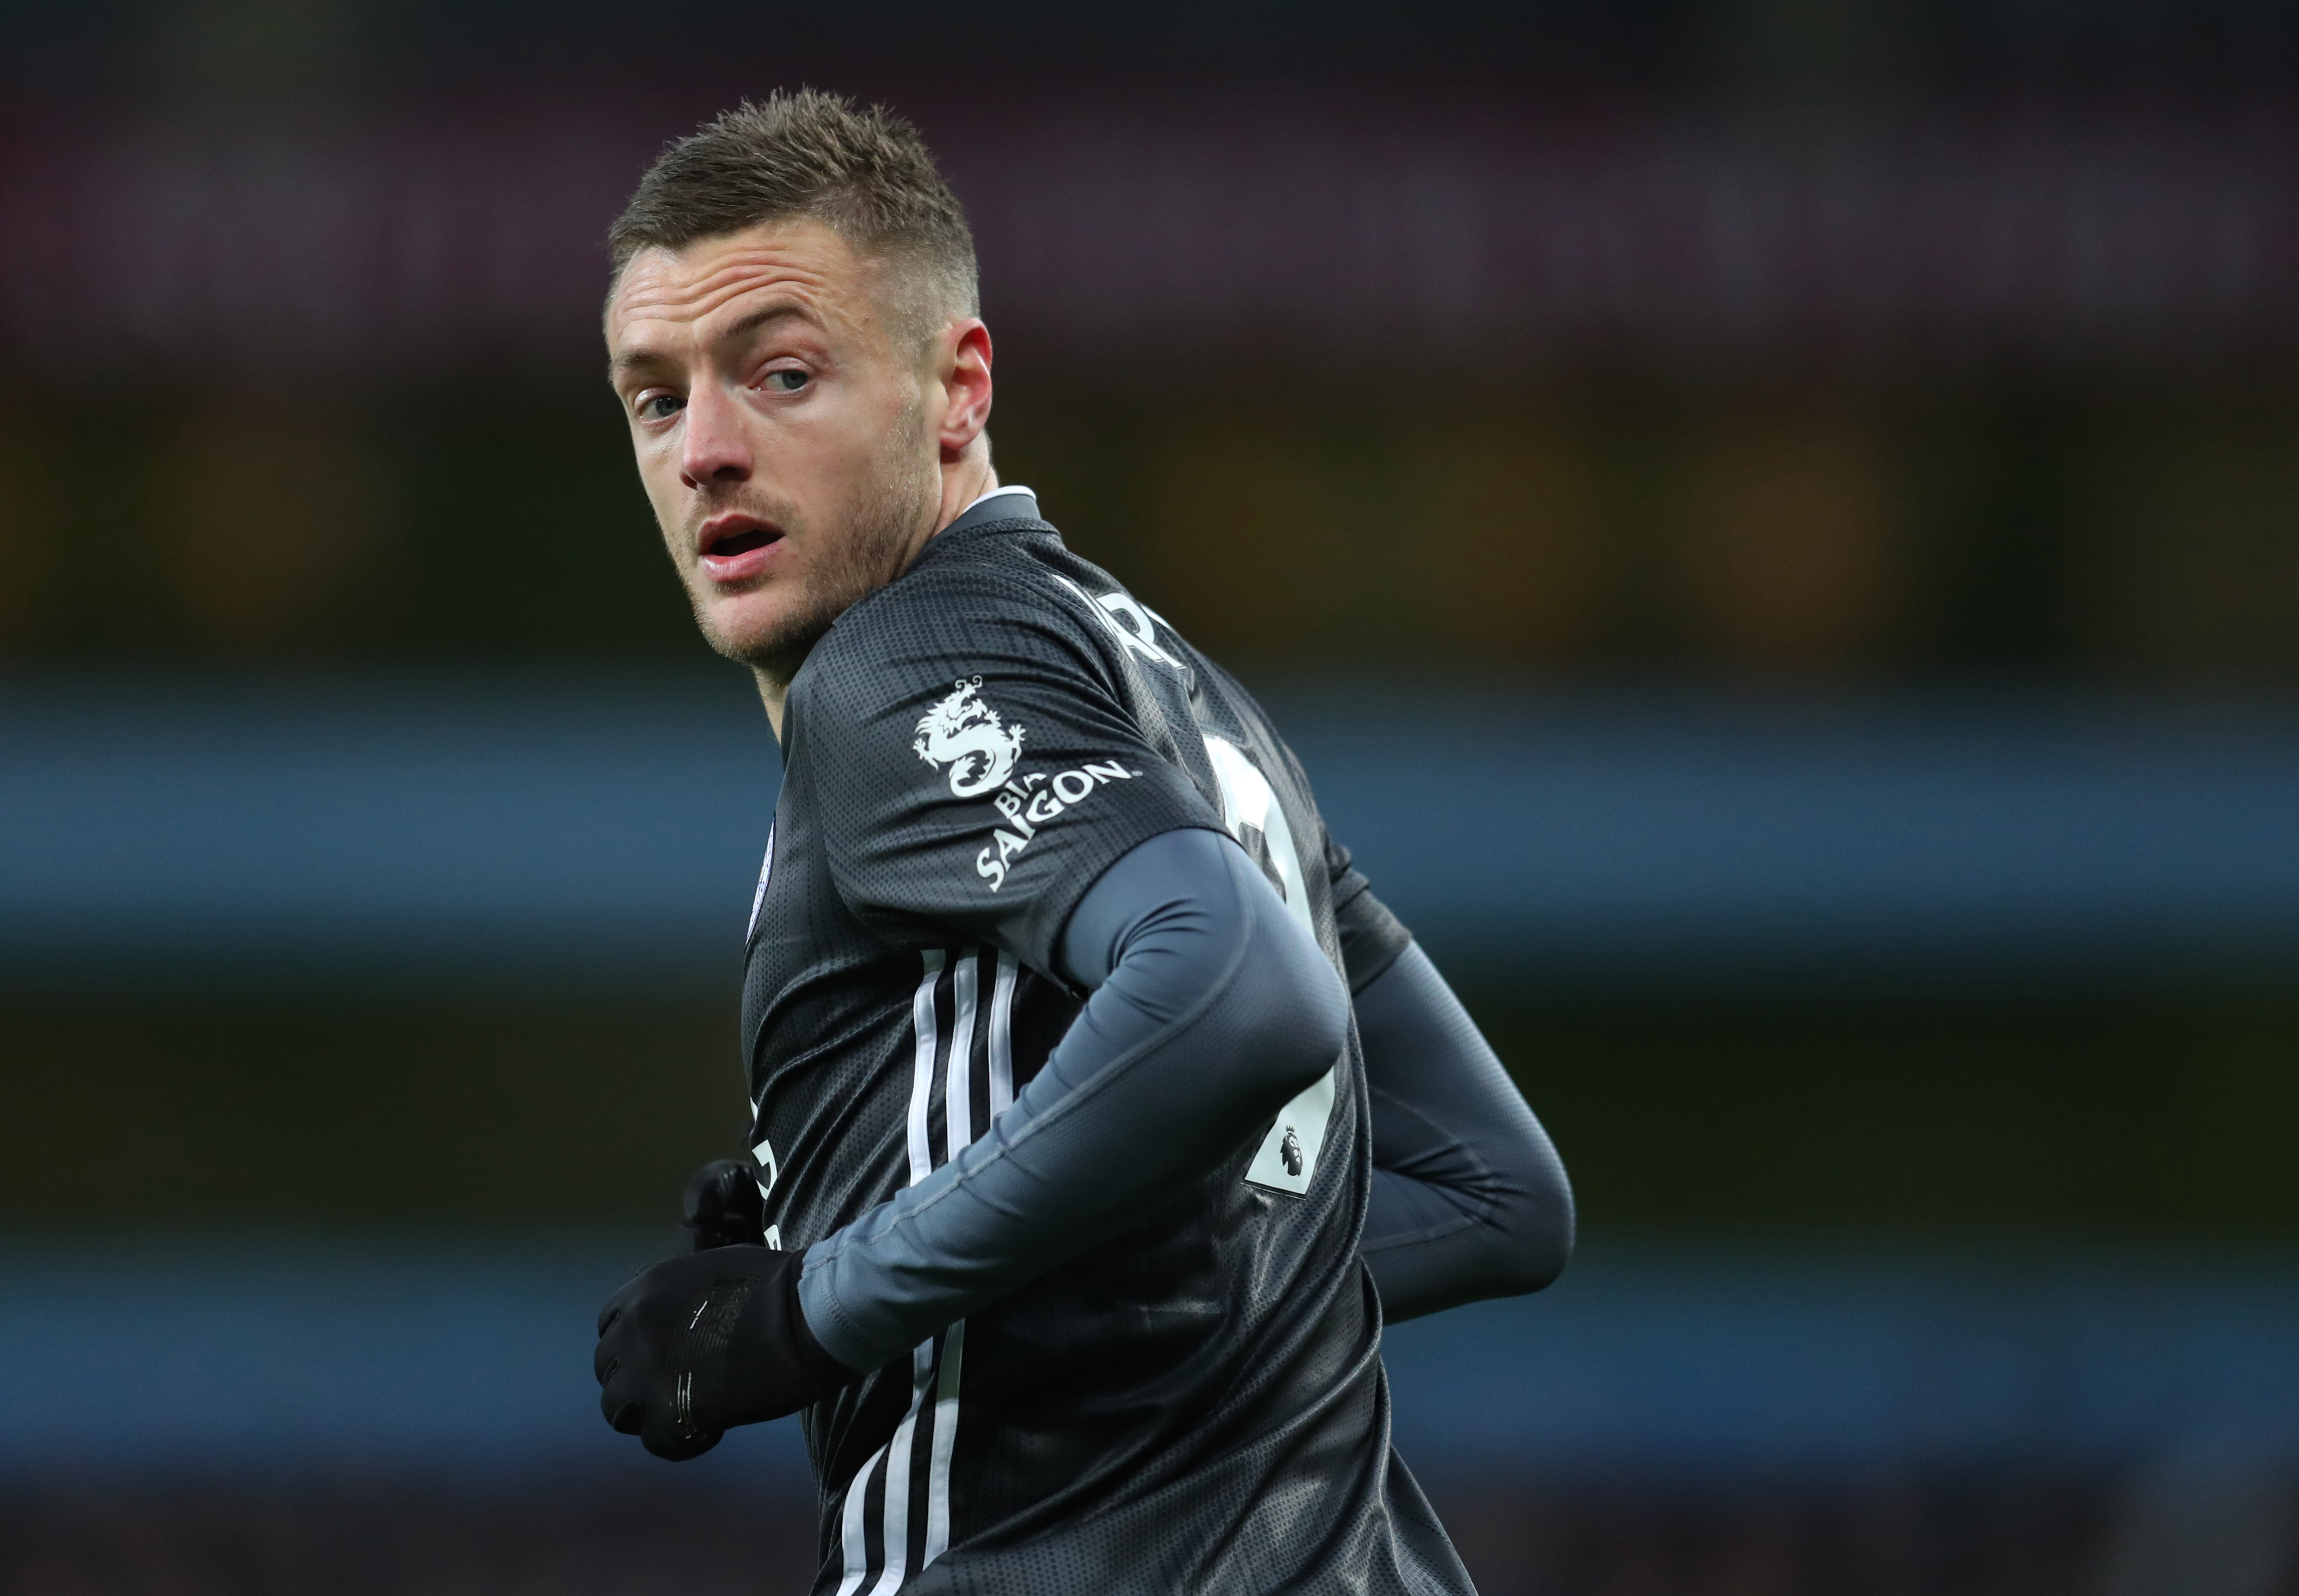 Can Vardy get back to his best? (Photo by Catherine Ivill/Getty Images)